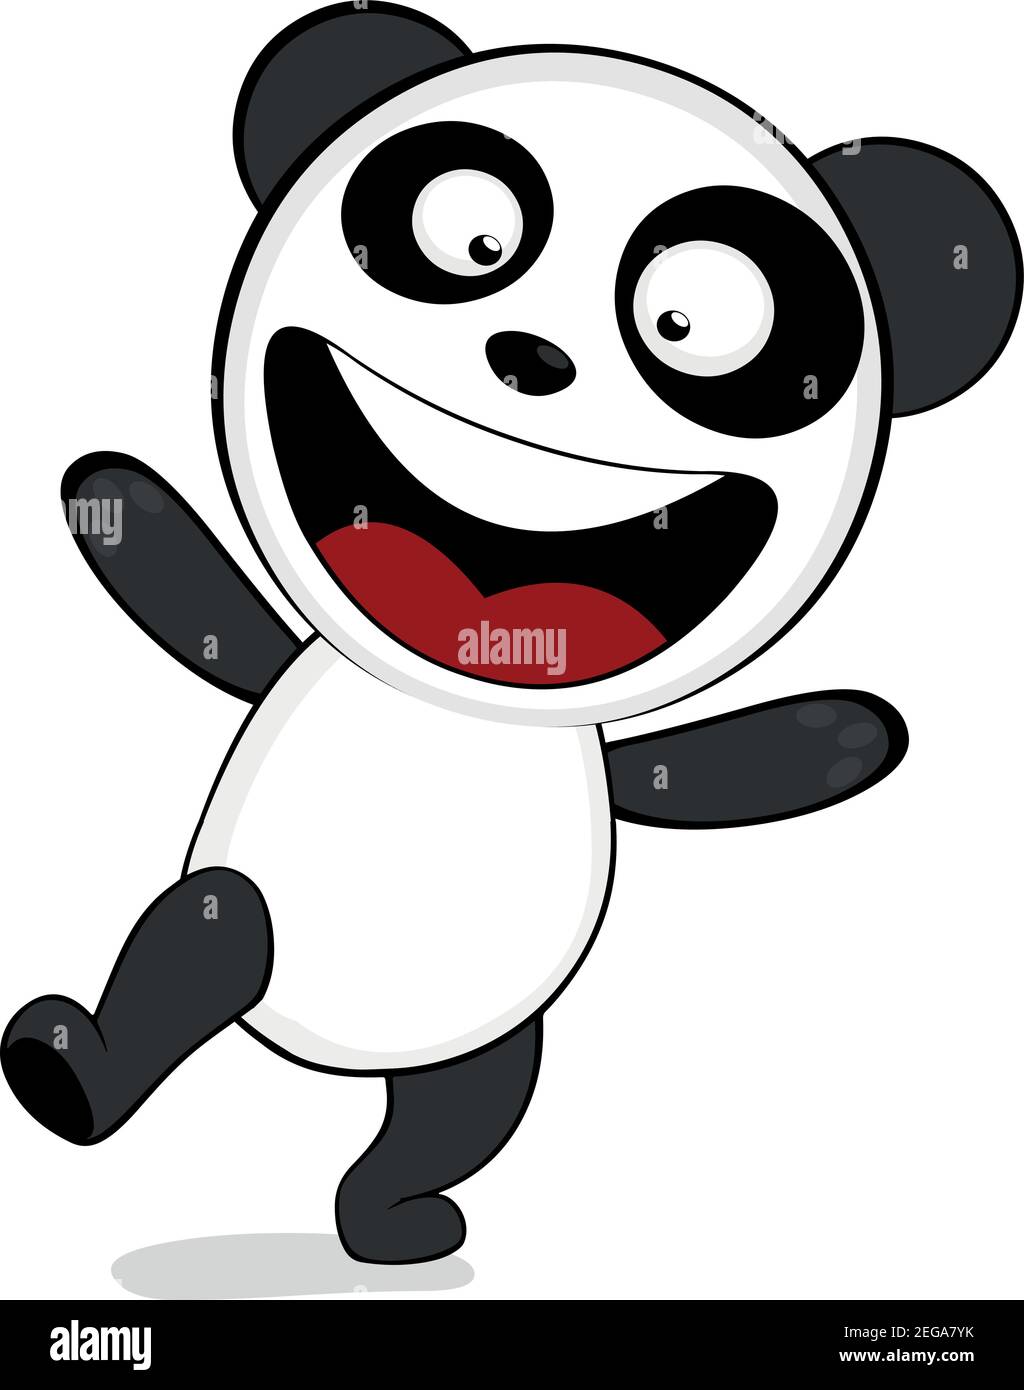 Vector emoticon illustration of a cute and sweet cartoon panda bear with a happy expression Stock Vector